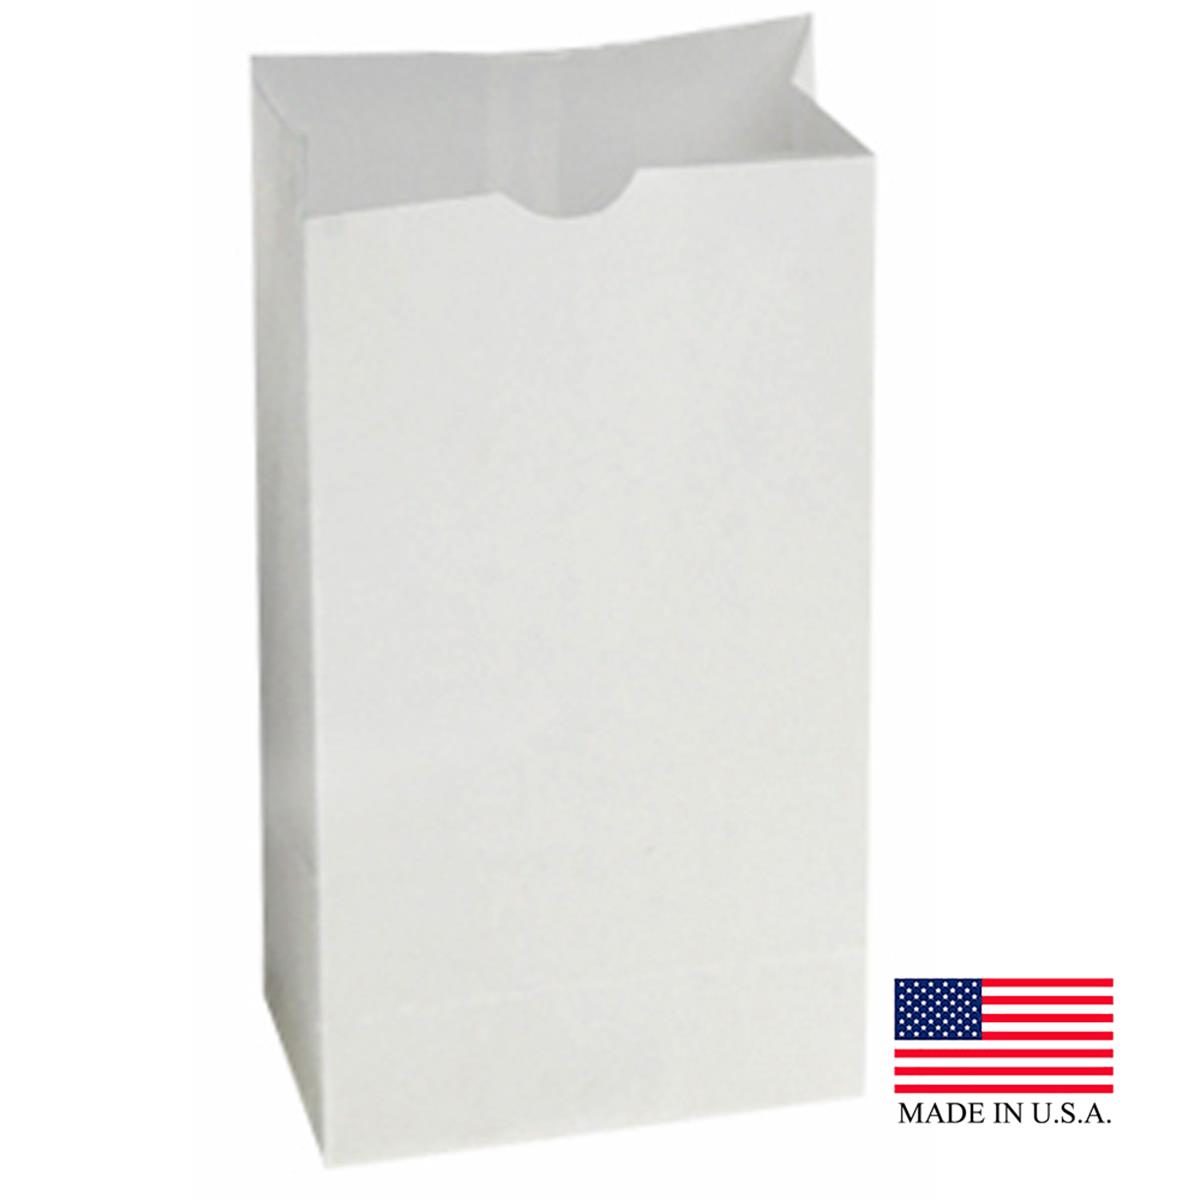 300294 Pe 5 X 3.8 X 9.68 In. White 4 Lbs Sos Double Waxed Bakery Bag - Case Of 1000